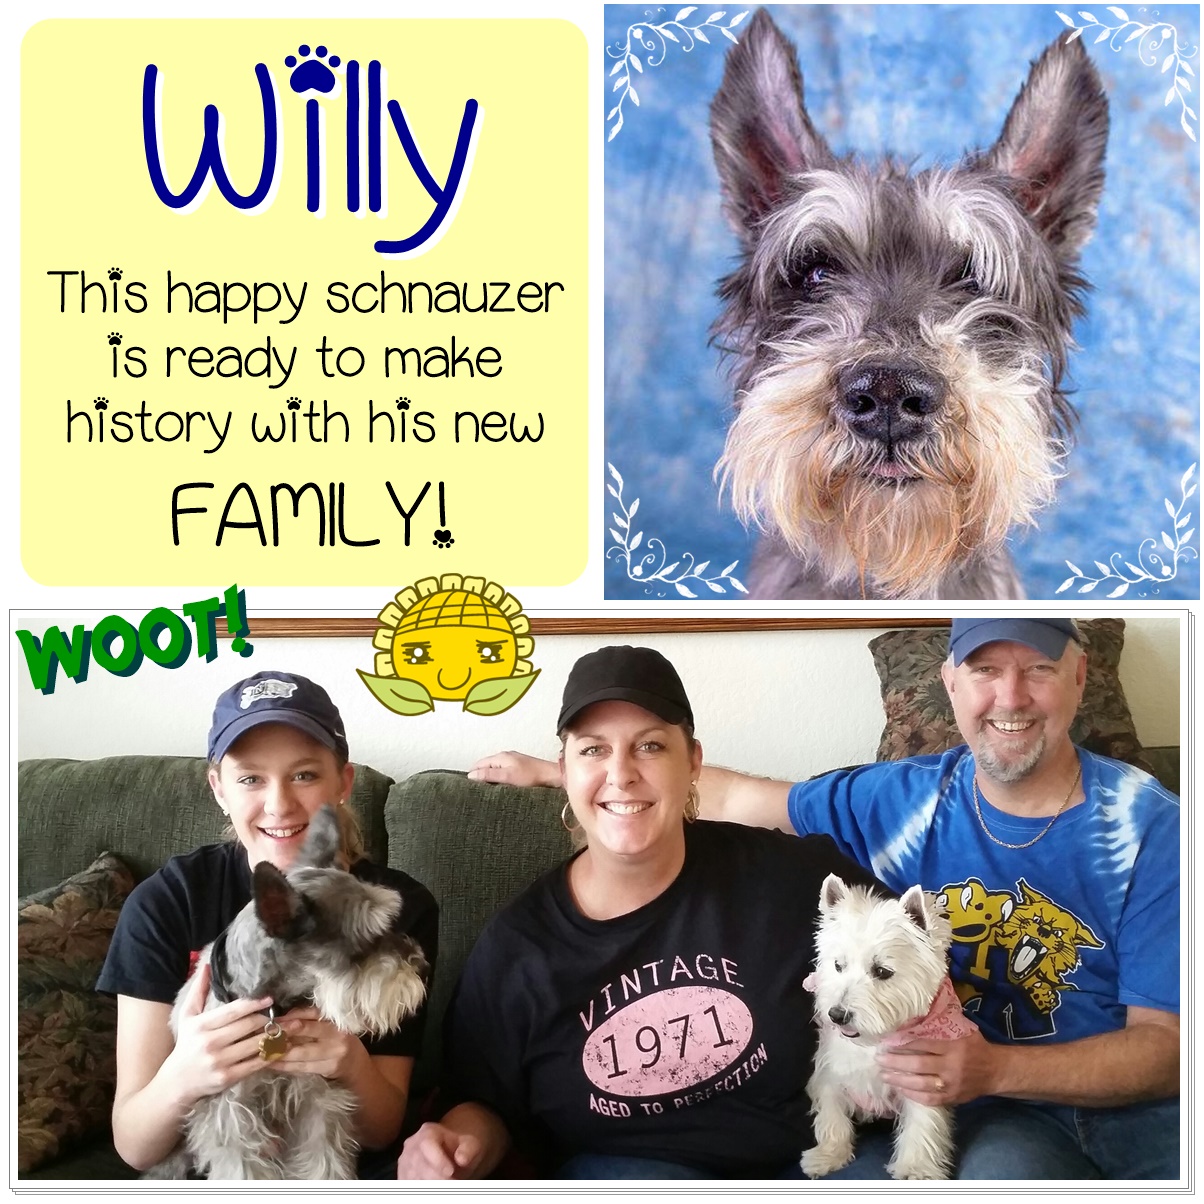 Willy (Schnauzer) adopted